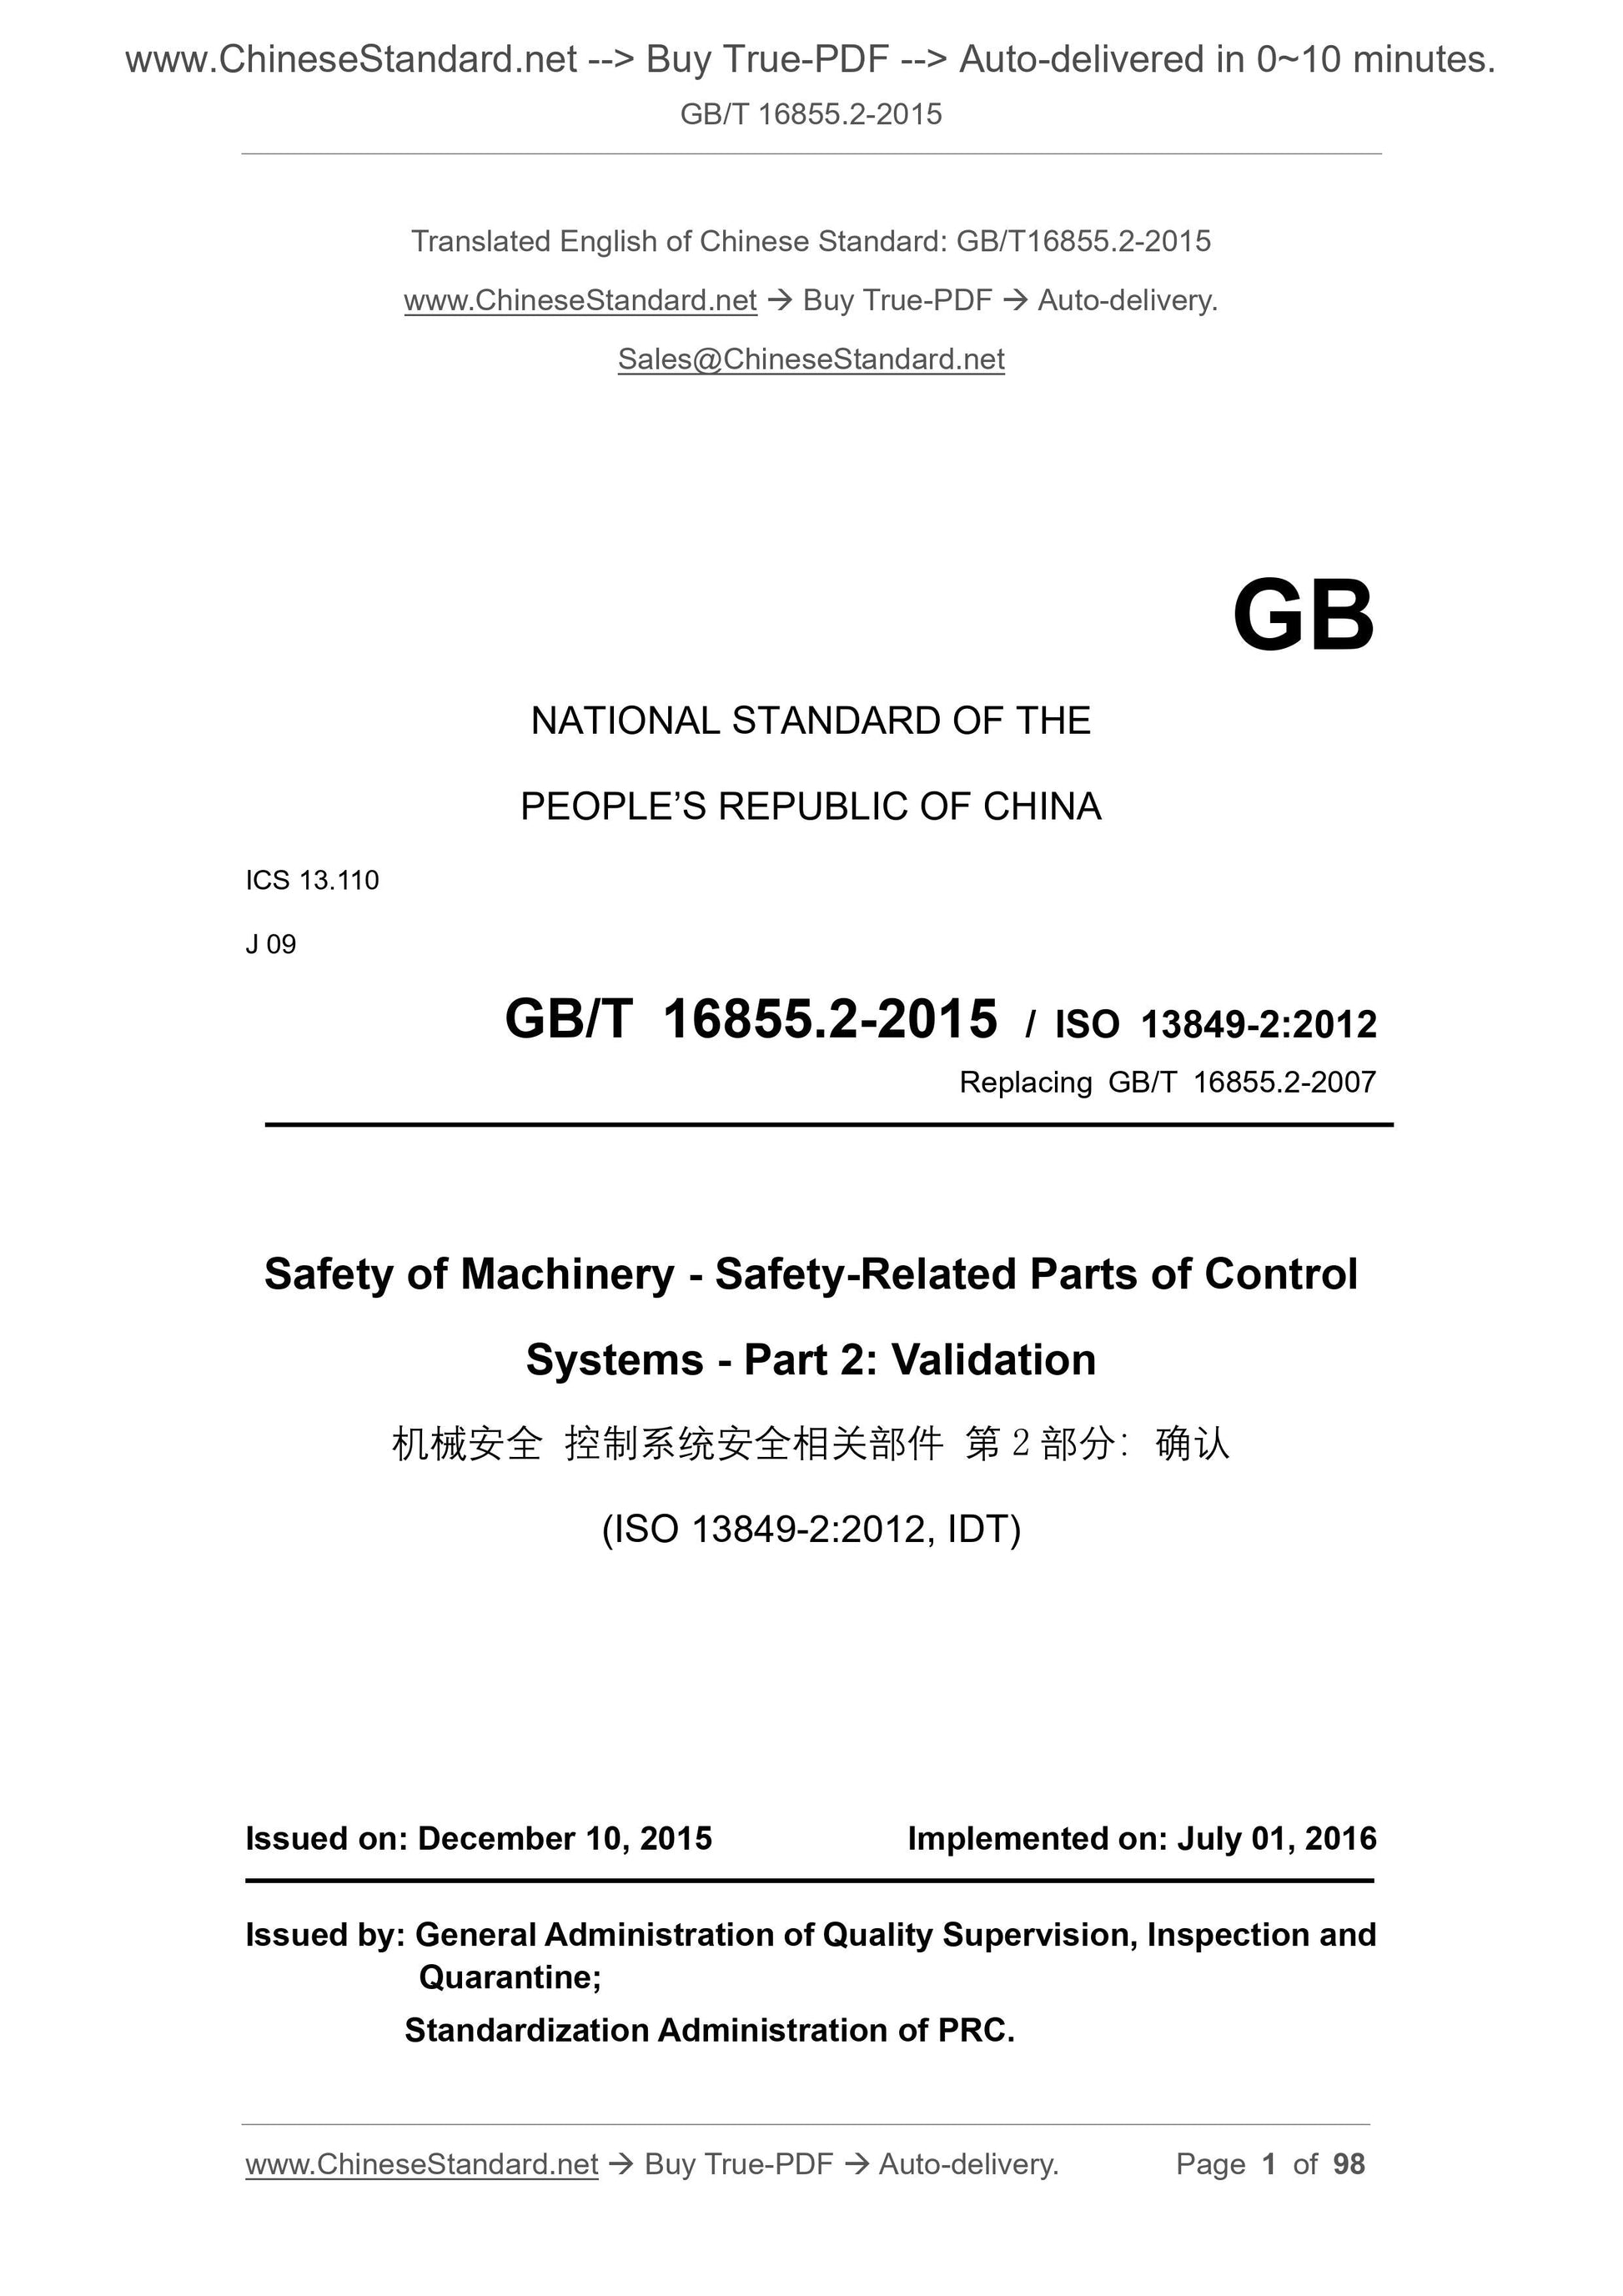 GB/T 16855.2-2015 Page 1